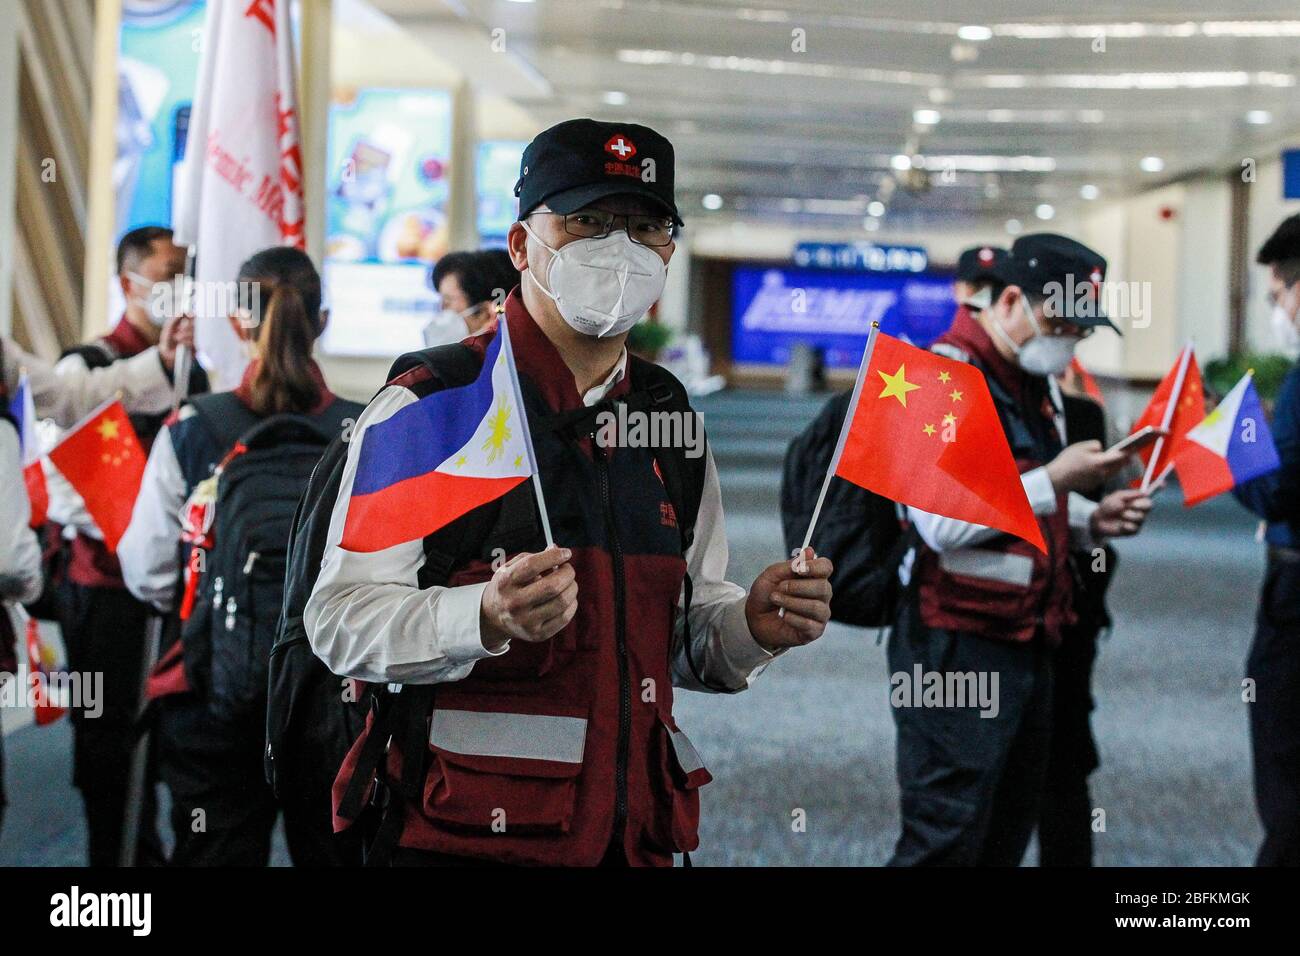 (200419) -- PARANAQUE CITY, April 19, 2020 (Xinhua) -- Members of the Chinese Anti-Epidemic Medical Expert Team wave goodbye as they leave Manila for China at the Manila Ninoy Aquino International Airport (NAIA) in Paranaque City, the Philippines, on April 19, 2020. The Philippines on Sunday thanked China anew for its help, saying the crucial medical supplies donated by the Chinese government and the ideas shared by the Chinese experts have 'provided a lifeline' to the Philippines' efforts to step up the fight against the COVID-19. Philippine Health Secretary Francisco Duque made the remark Stock Photo